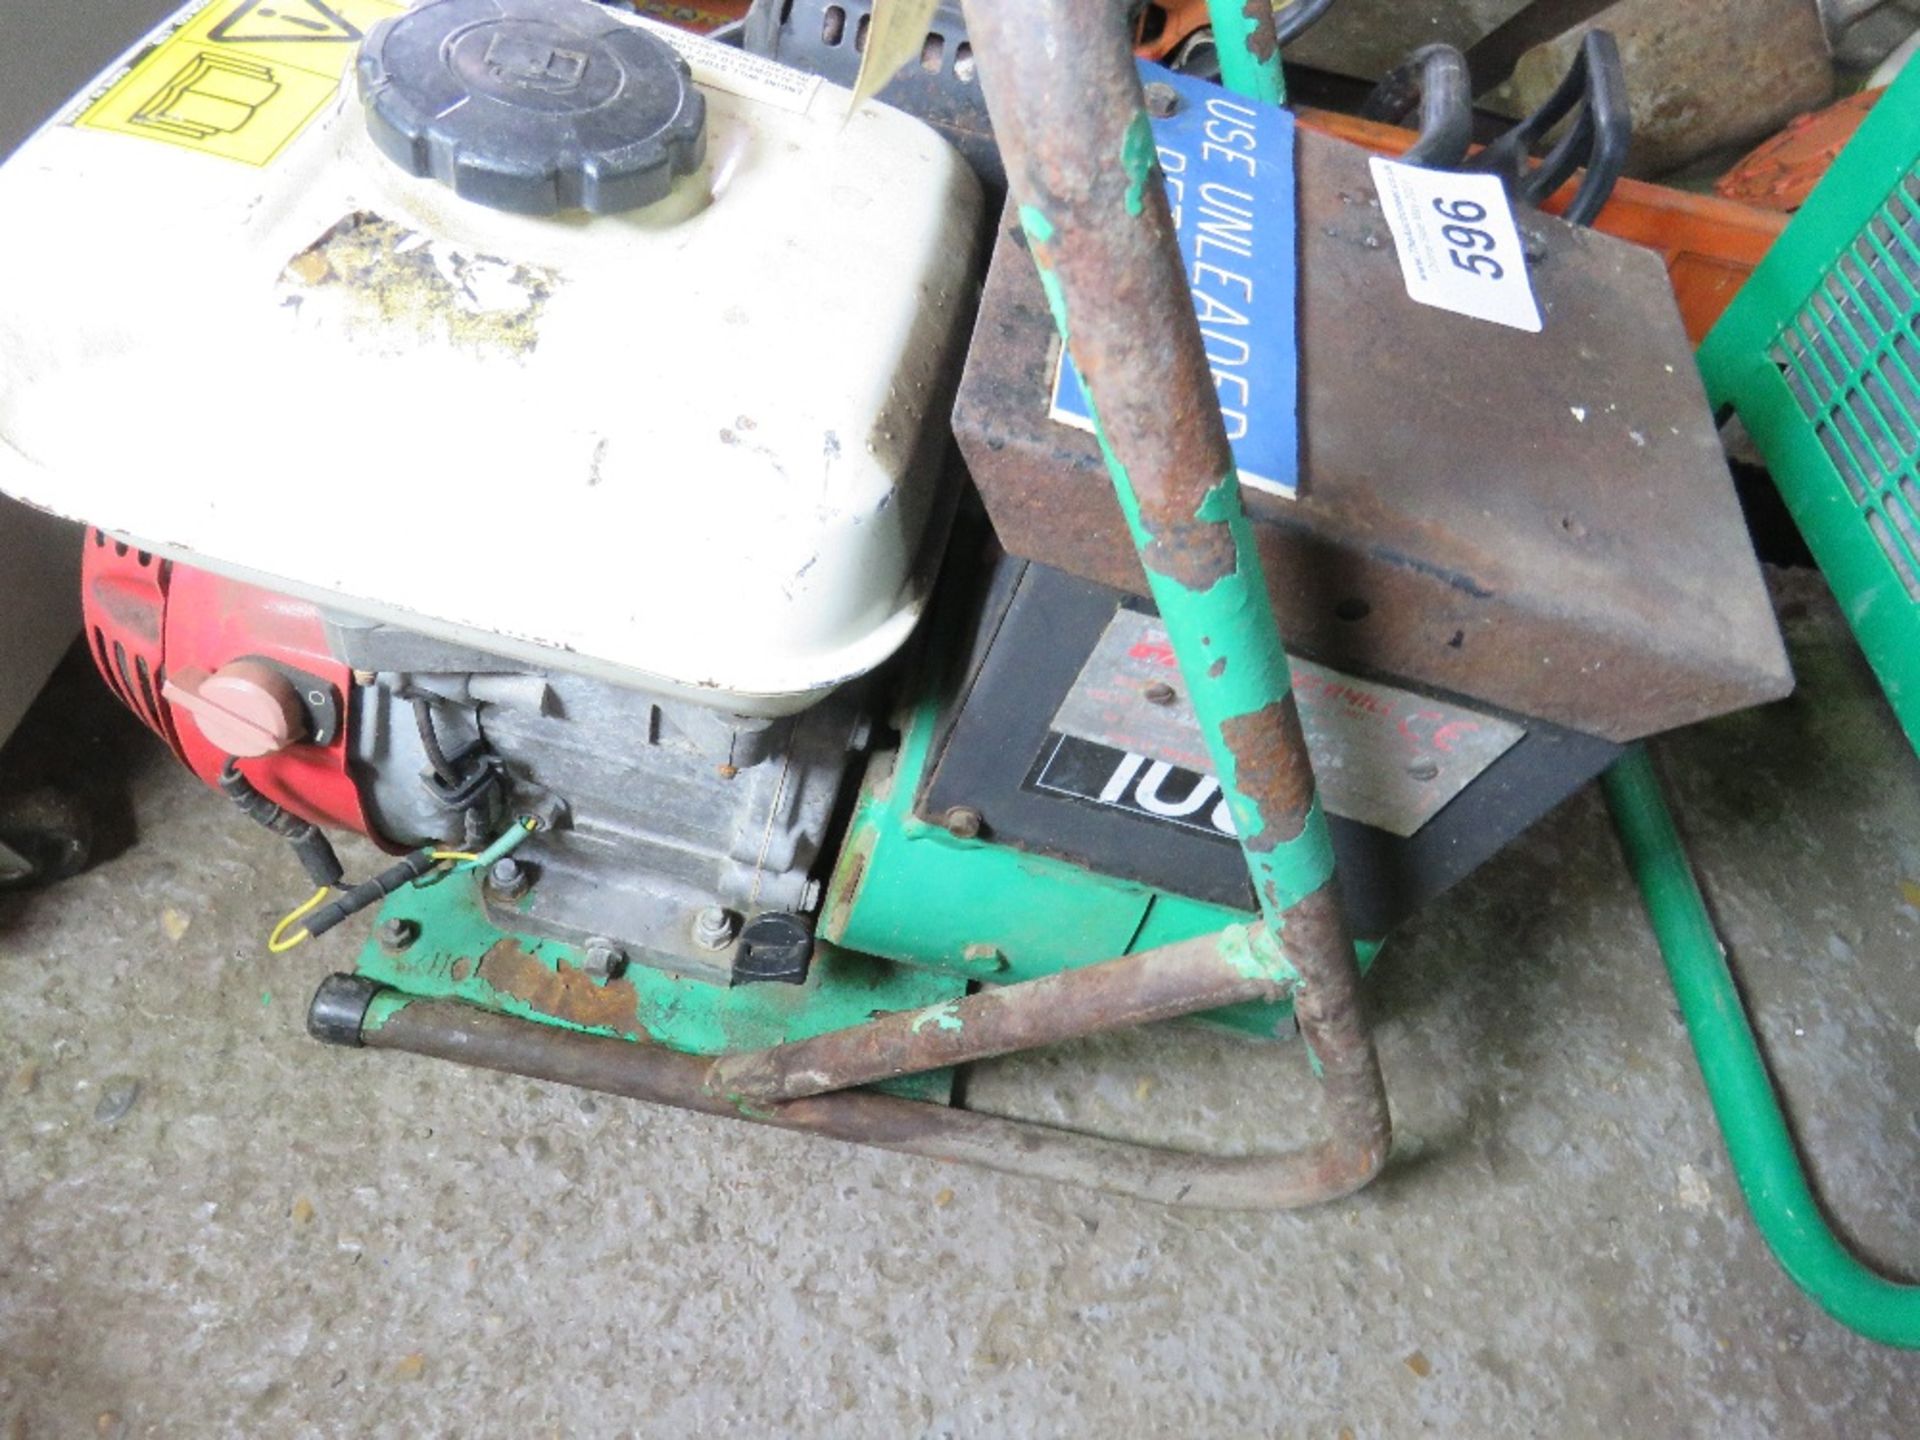 PETROL GENERATOR. UNTESTED, CONDITION UNKNOWN. - Image 3 of 3